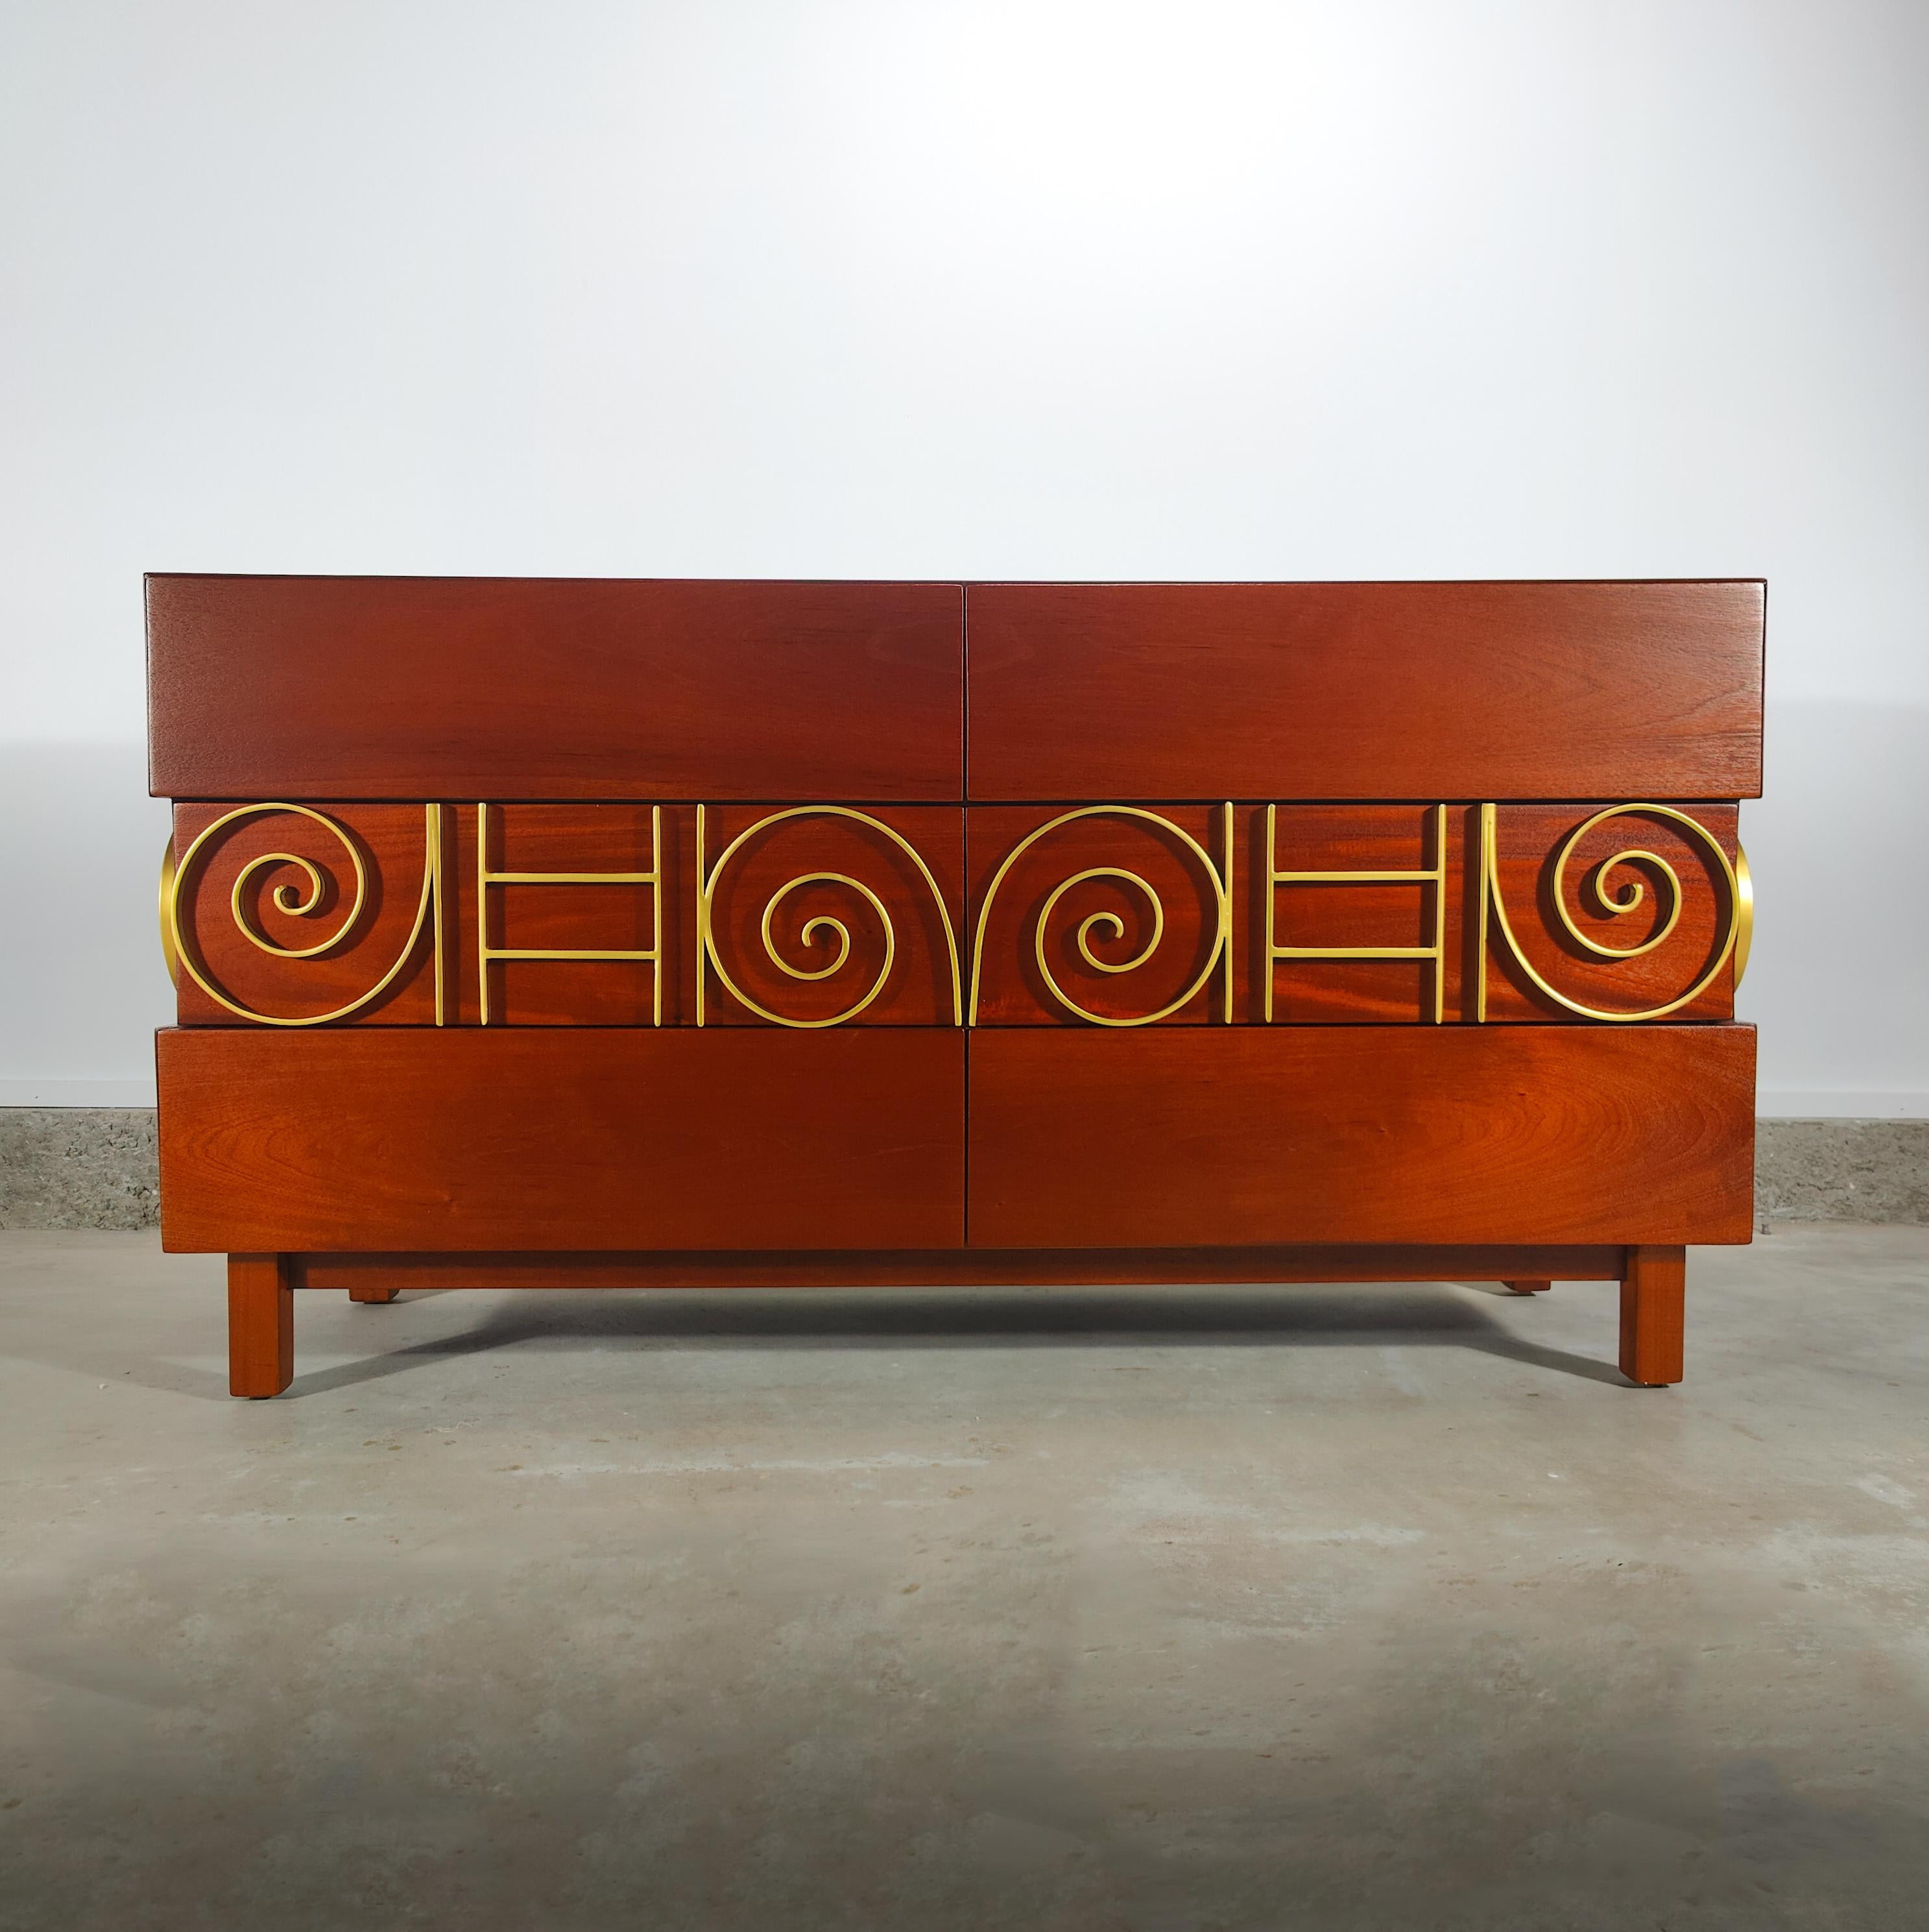 Now available is an important lowboy designed by Edmond J. Spence for Industria Mueblera of Mexico c1950s. Features freshly refinished mahogany wood, intricate metal designs, and cultured labels throughout each drawer to show authenticity. Truly a